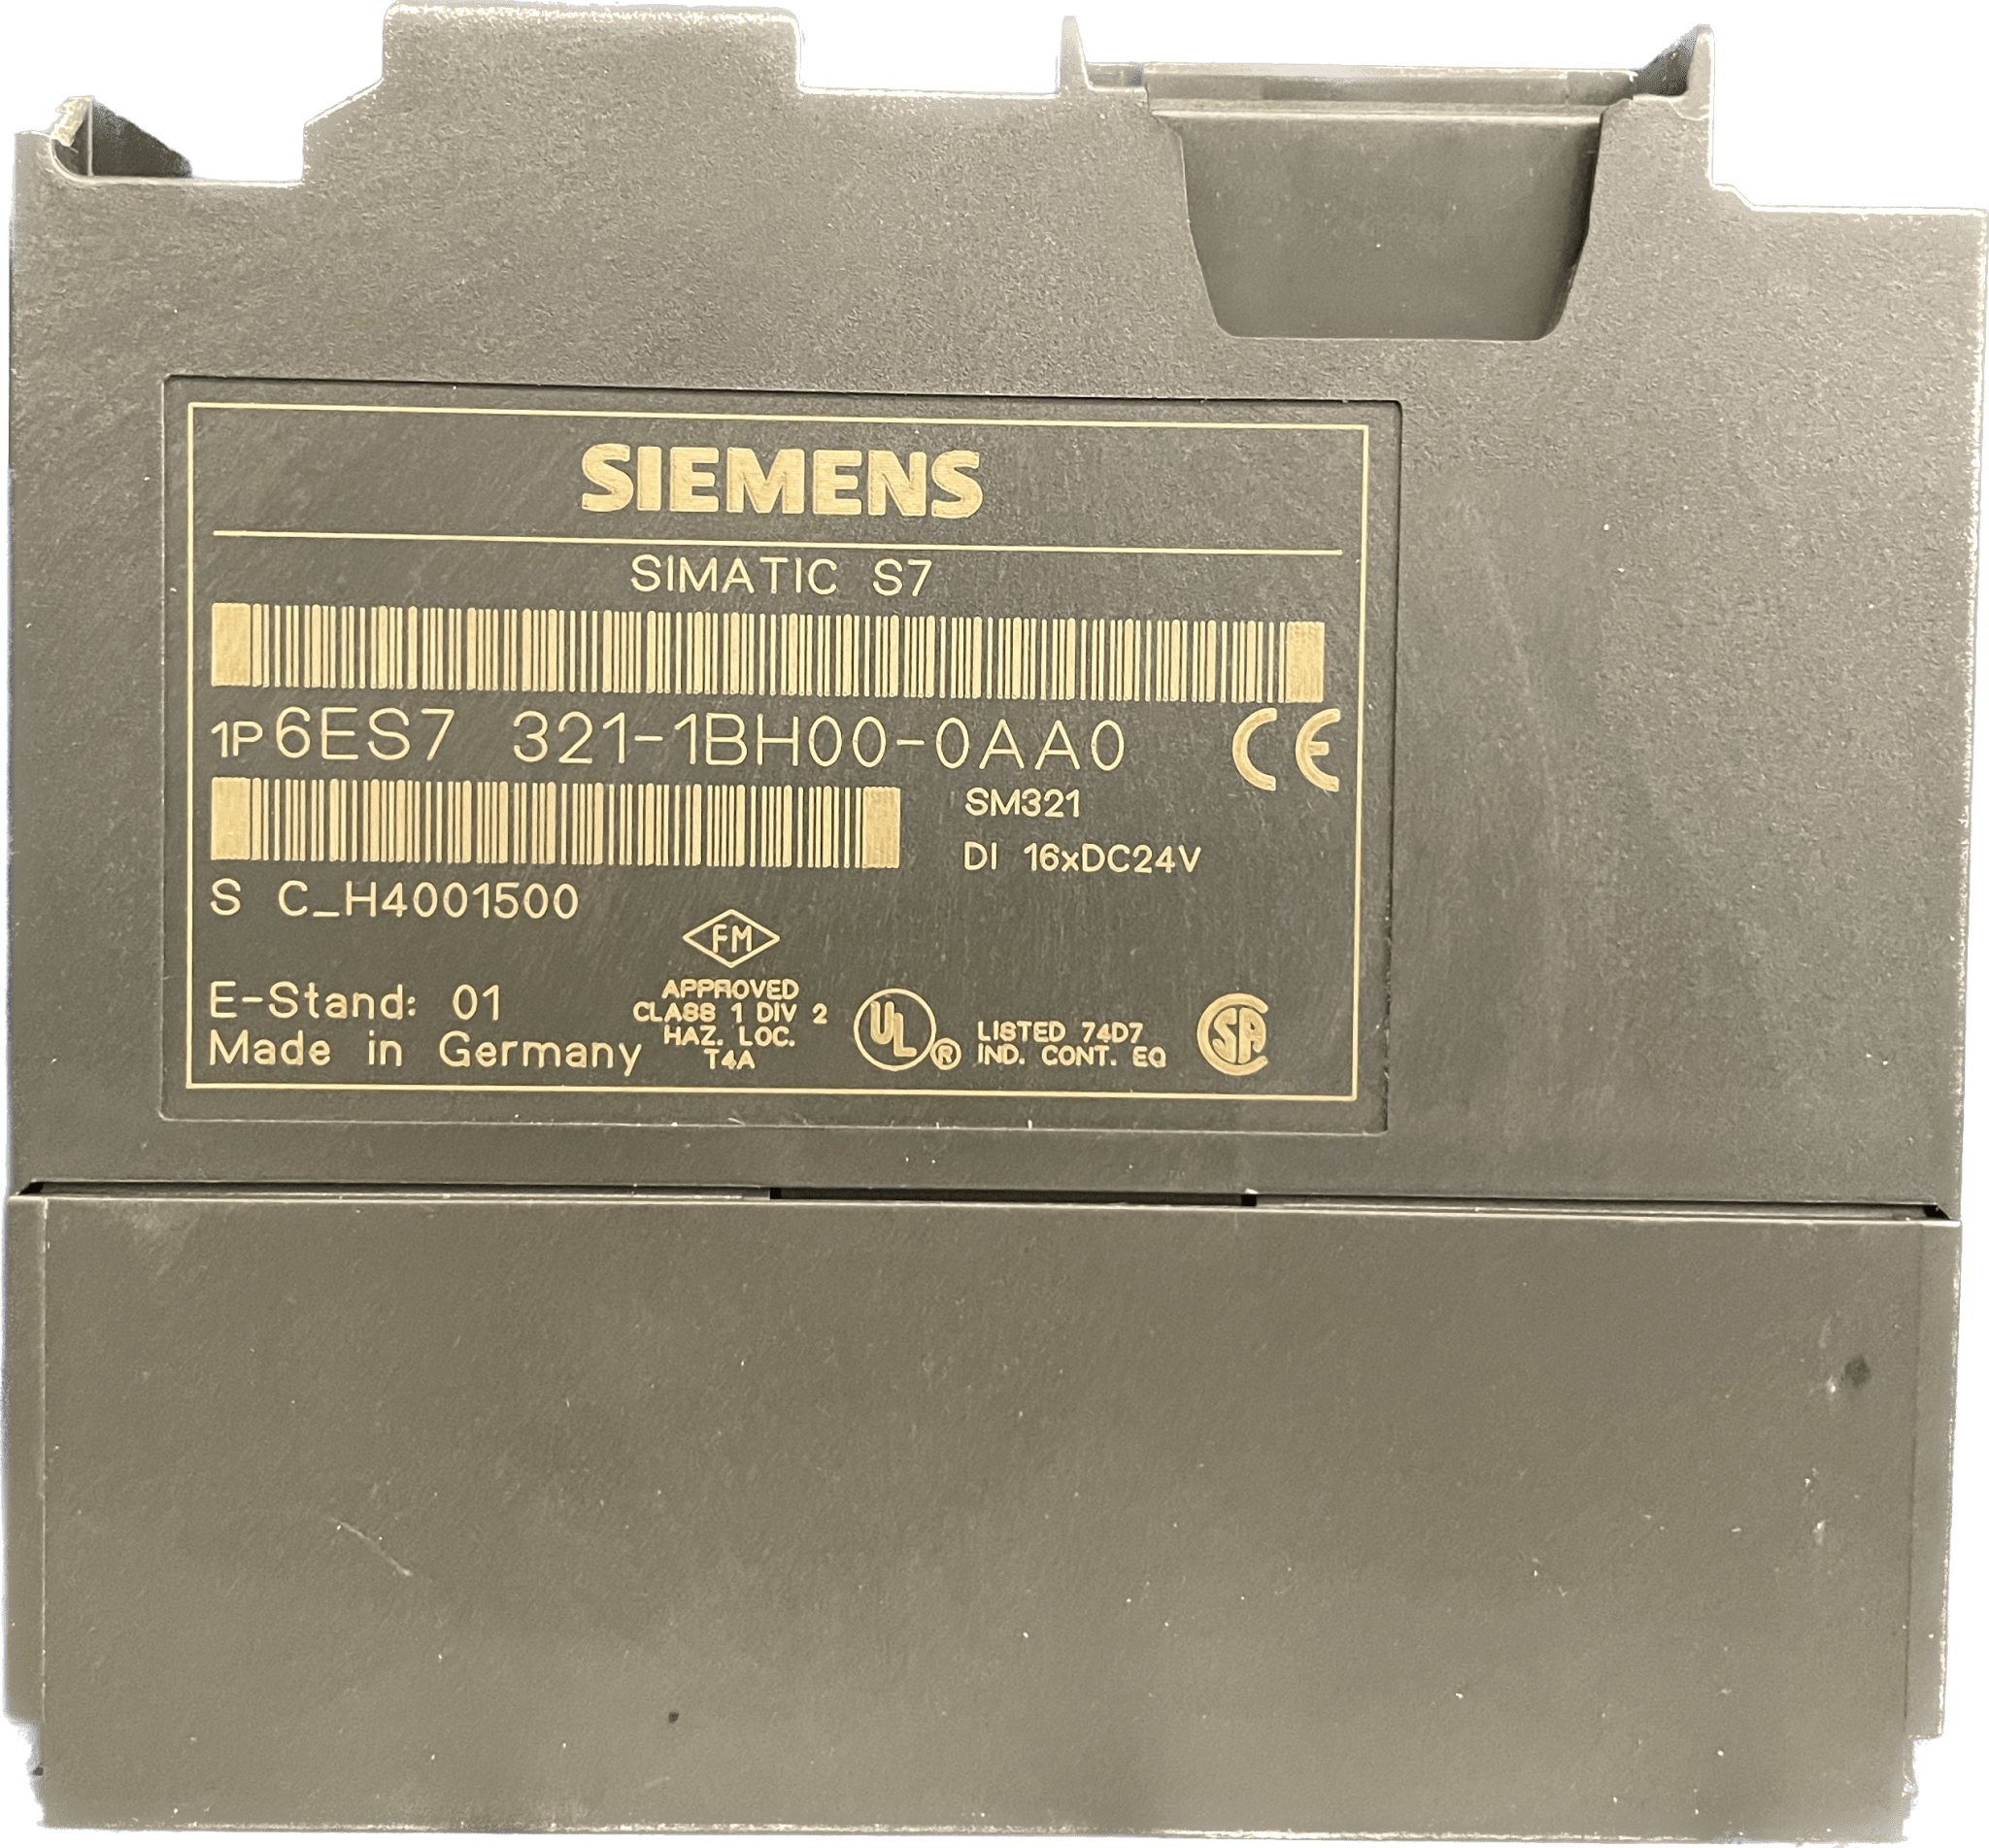 Siemens SIMATIC S7-300 6ES7 321-1BH00-0AA0 - #product_category# | Klenk Maschinenhandel